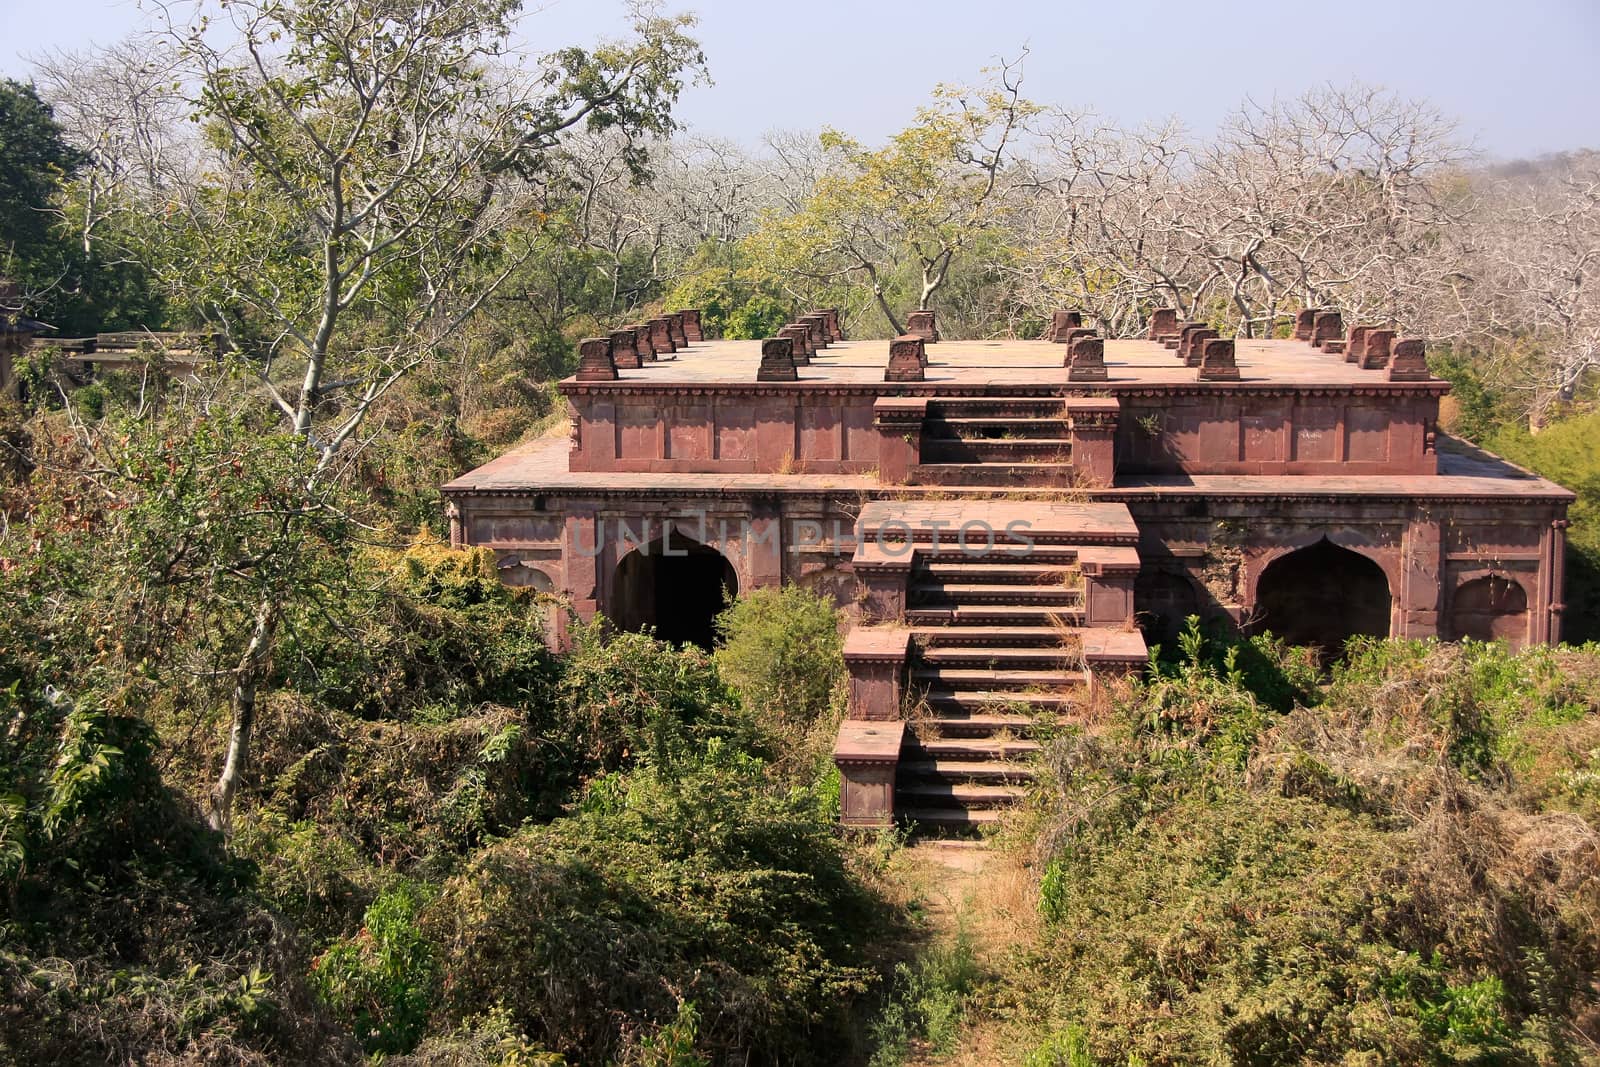 Old building surrounded by trees, Ranthambore Fort, Rajasthan, India